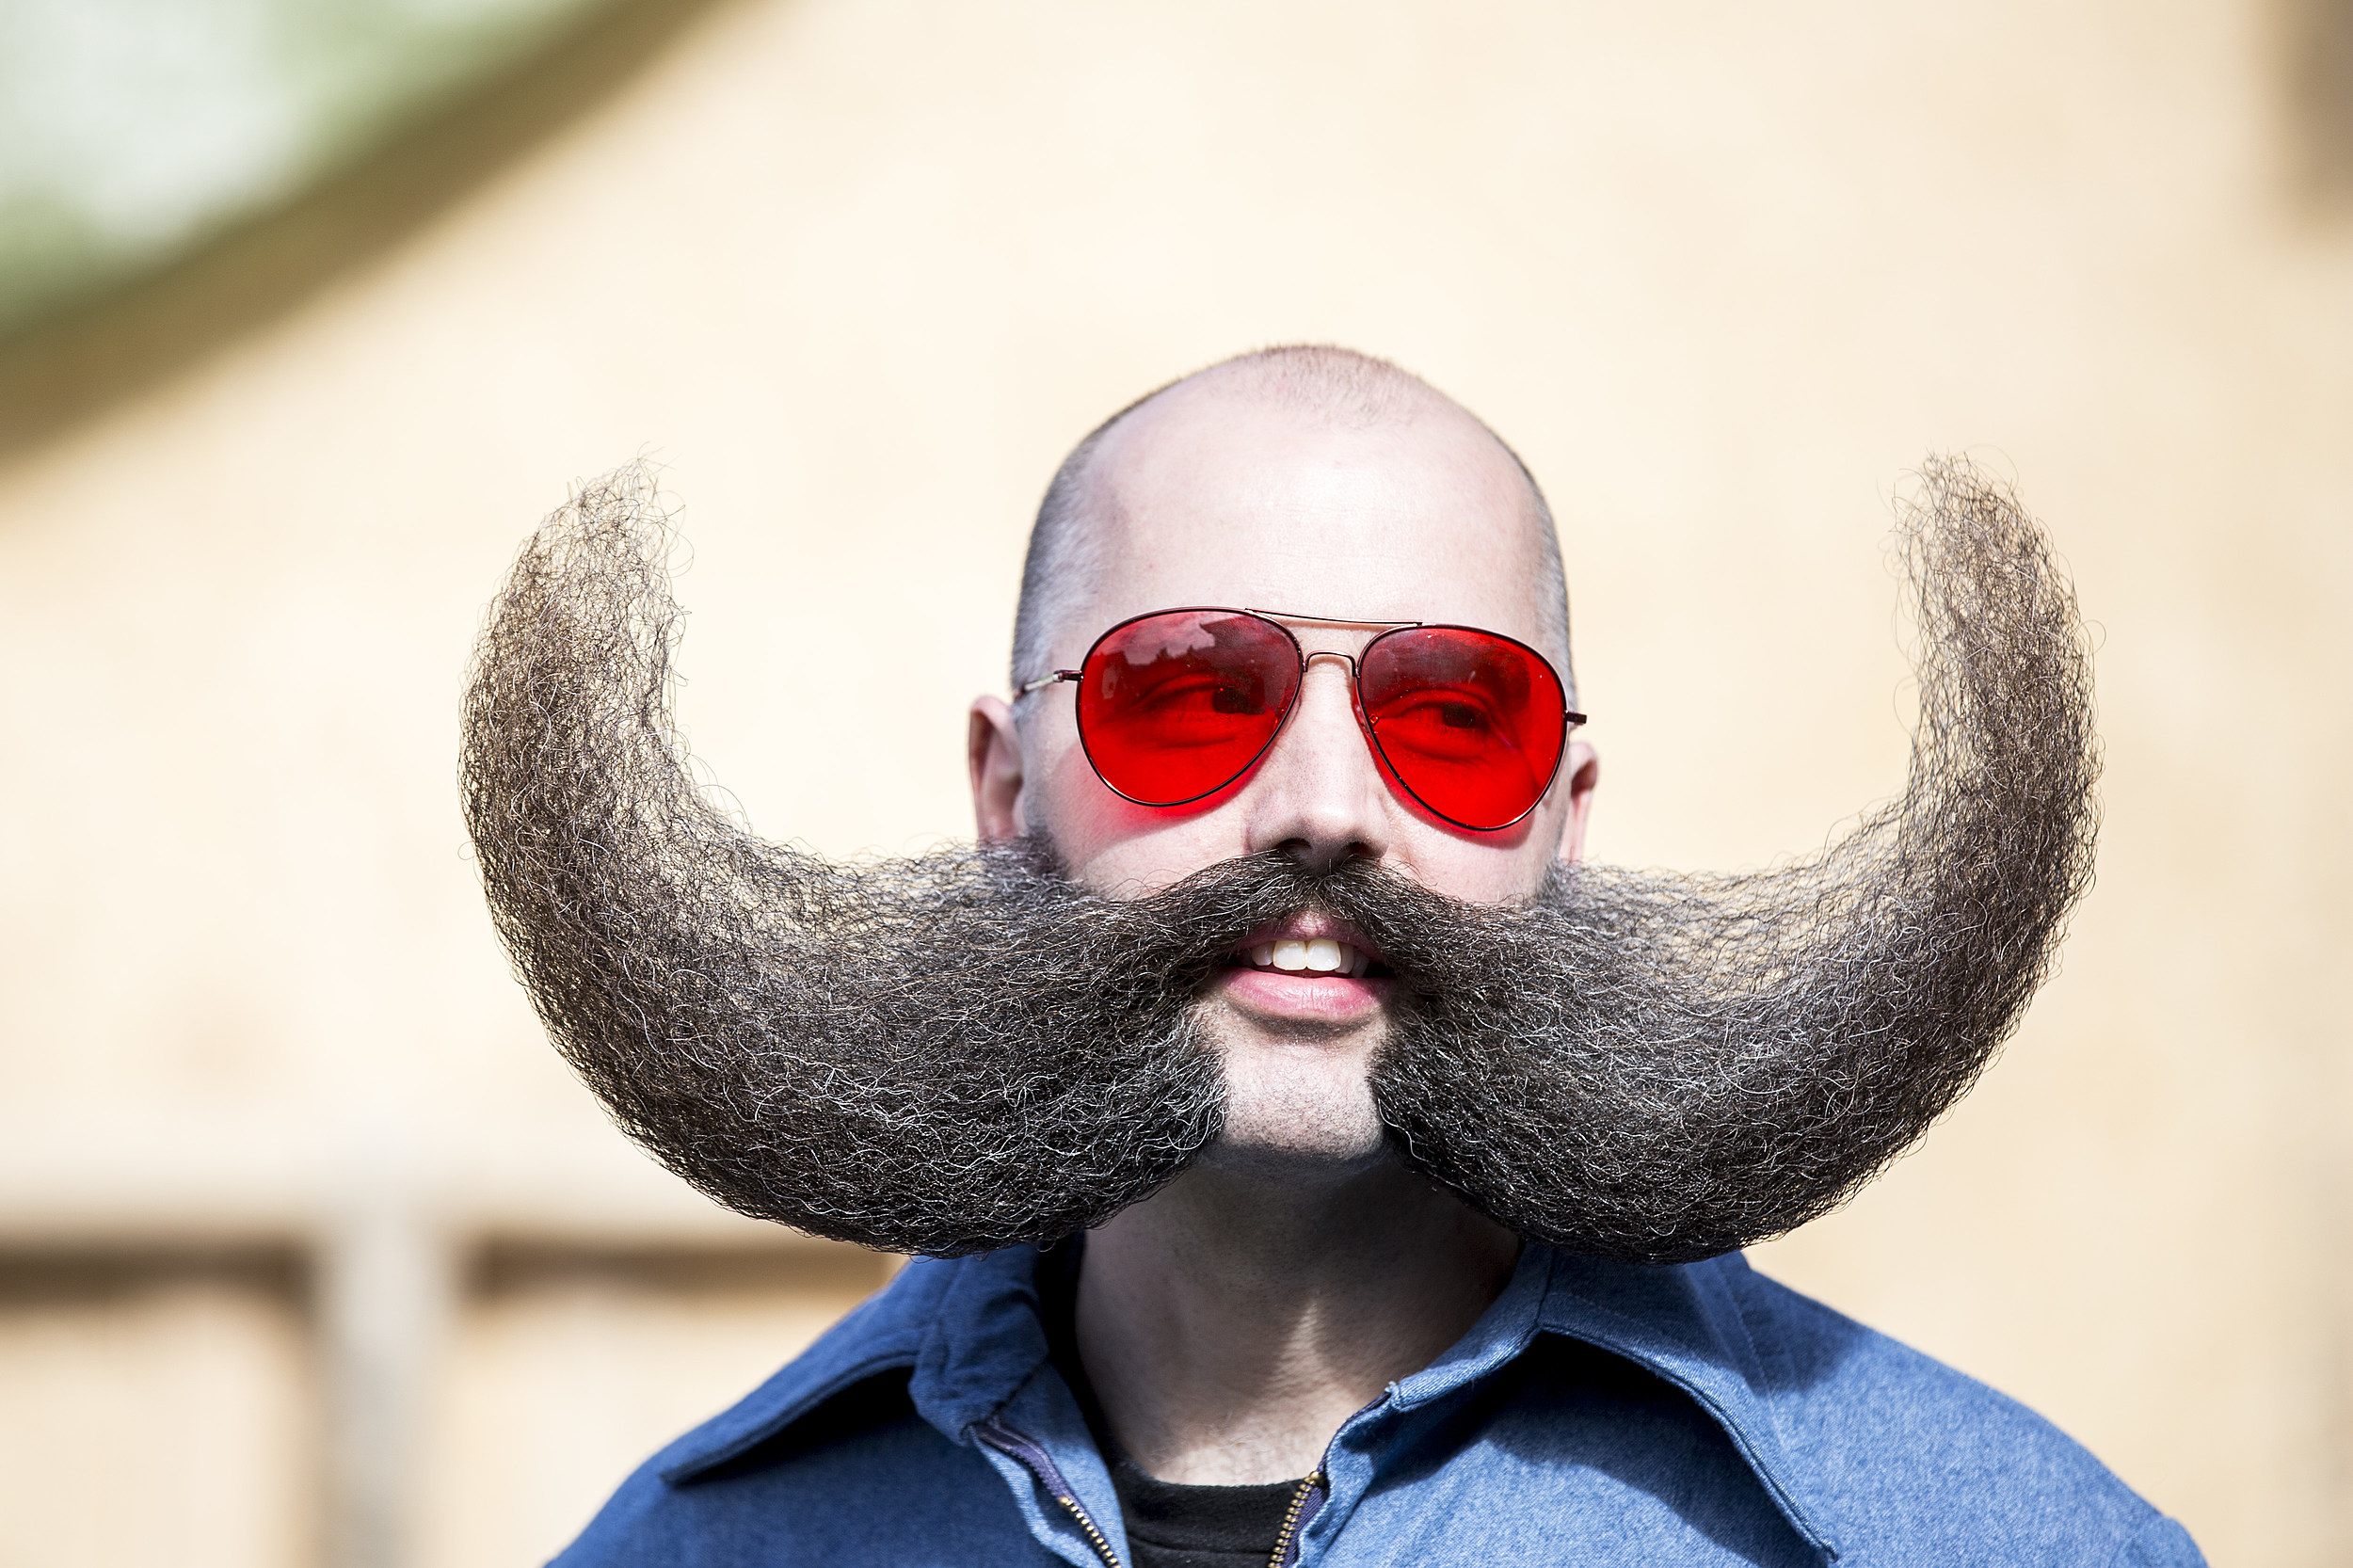 New Contest is Looking For America's “Most Talented Beard”